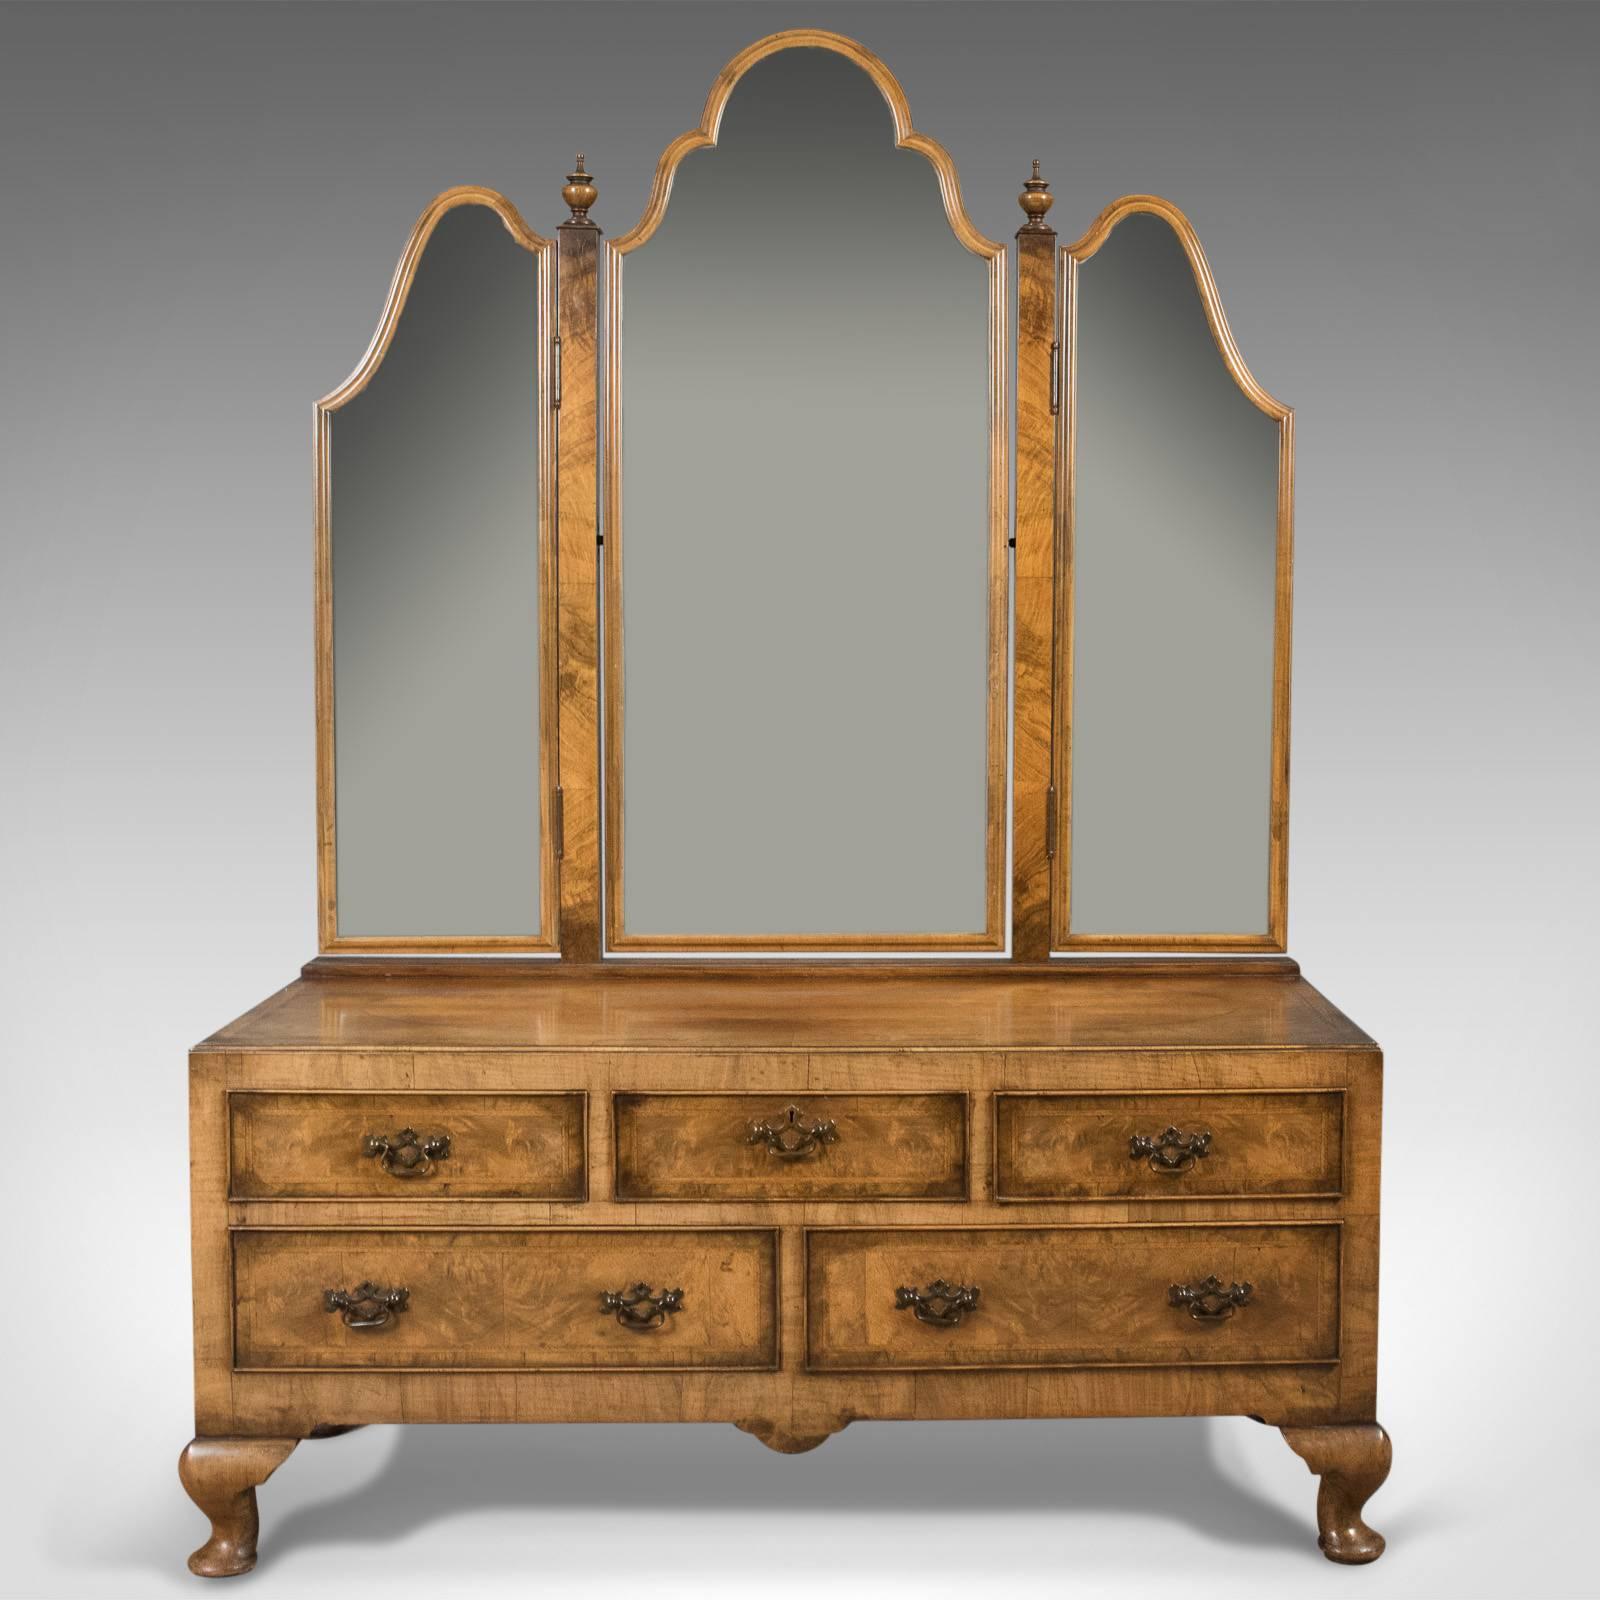 This is a superior quality walnut dressing table in the Queen Anne taste by one of London's finest historic furnishers Bartholomew & Fletcher.

Finished in attractive burr walnut with caramel tones and an aged patina
The top quarter, butterfly